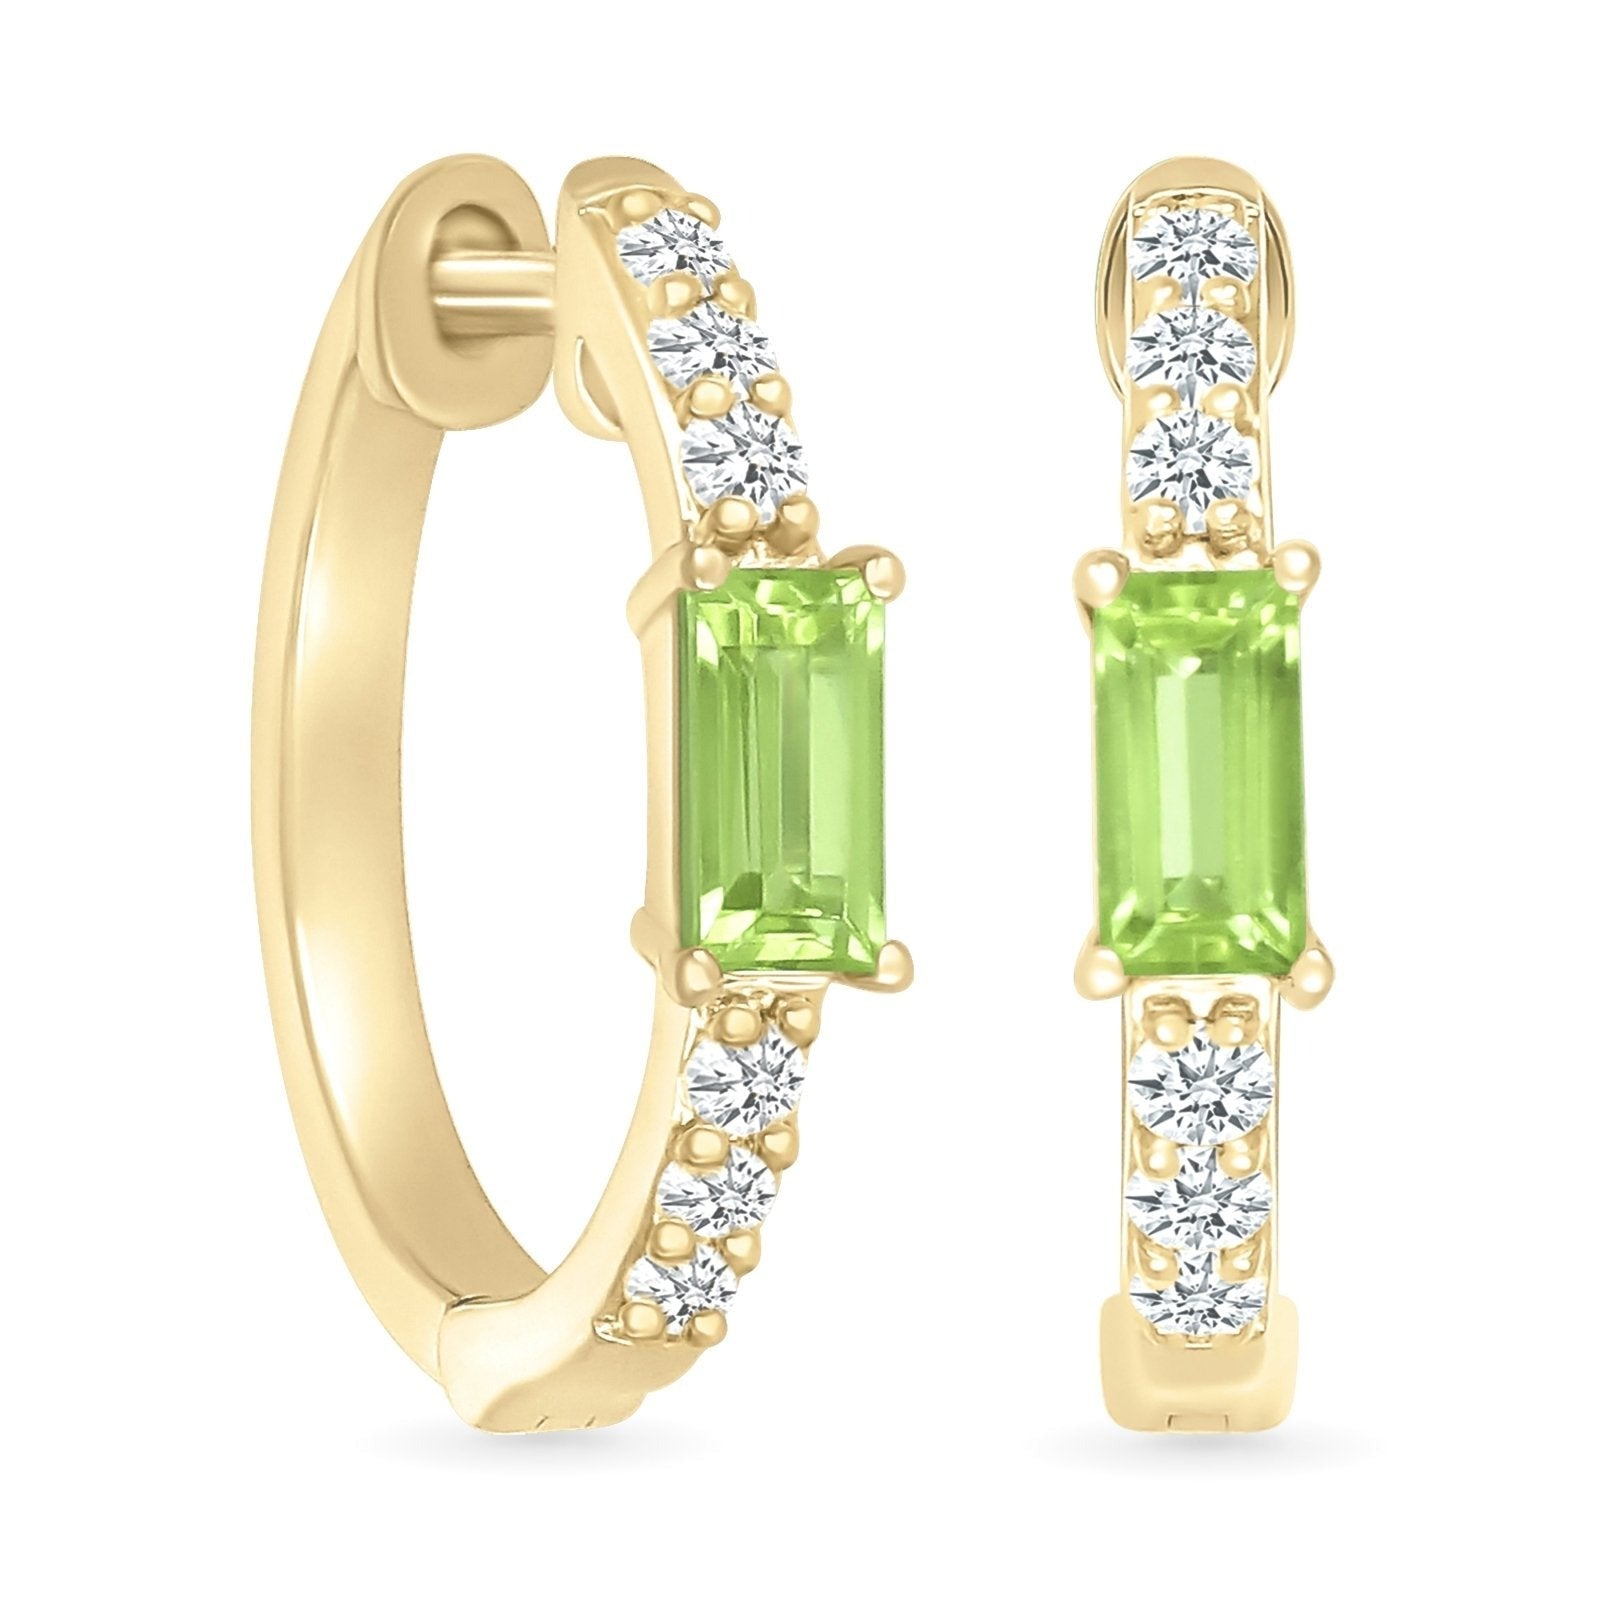 Emerald Shaped Peridot and White Sapphire Hoop Earrings Earrings Estella Collection #product_description# 32677 10k Birthstone Birthstone Jewelry #tag4# #tag5# #tag6# #tag7# #tag8# #tag9# #tag10#